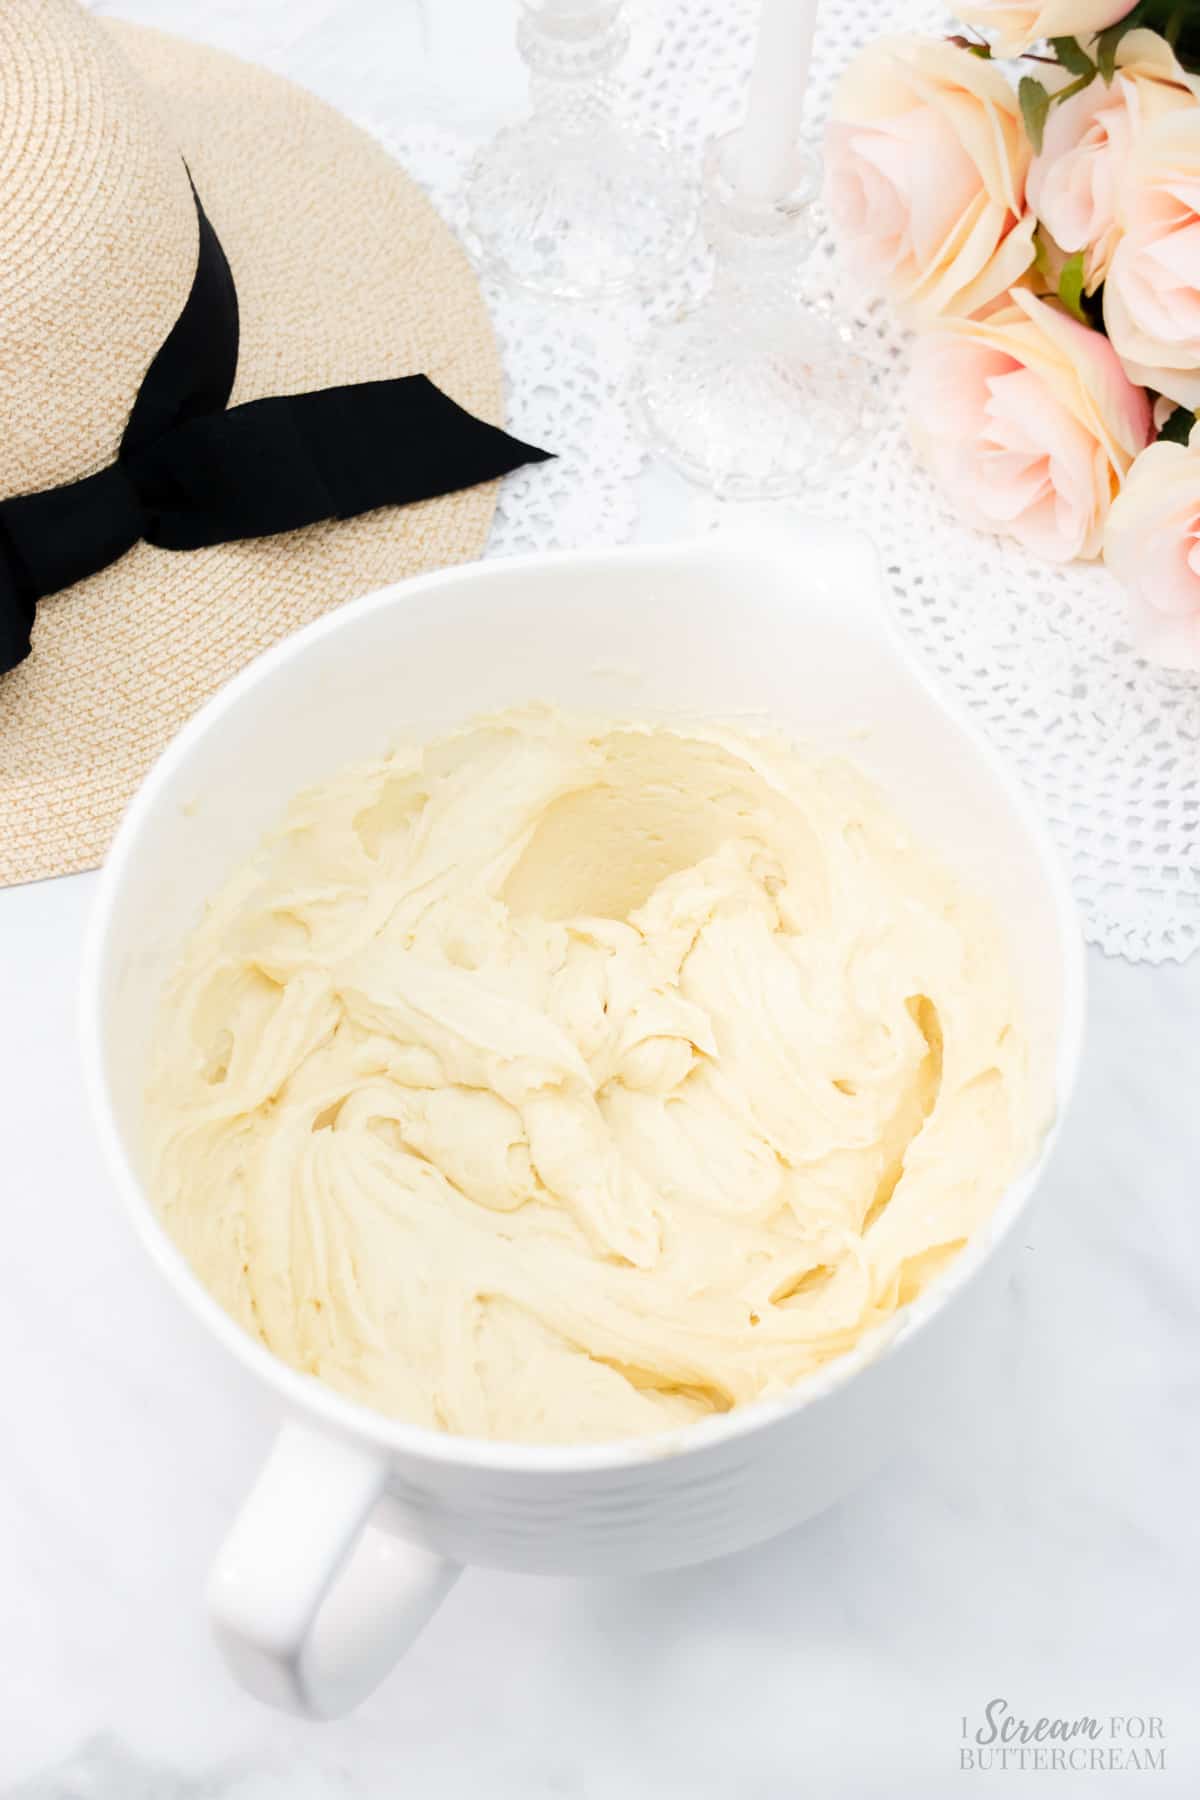 Prepared vanilla cake batter in a large white mixing bowl.